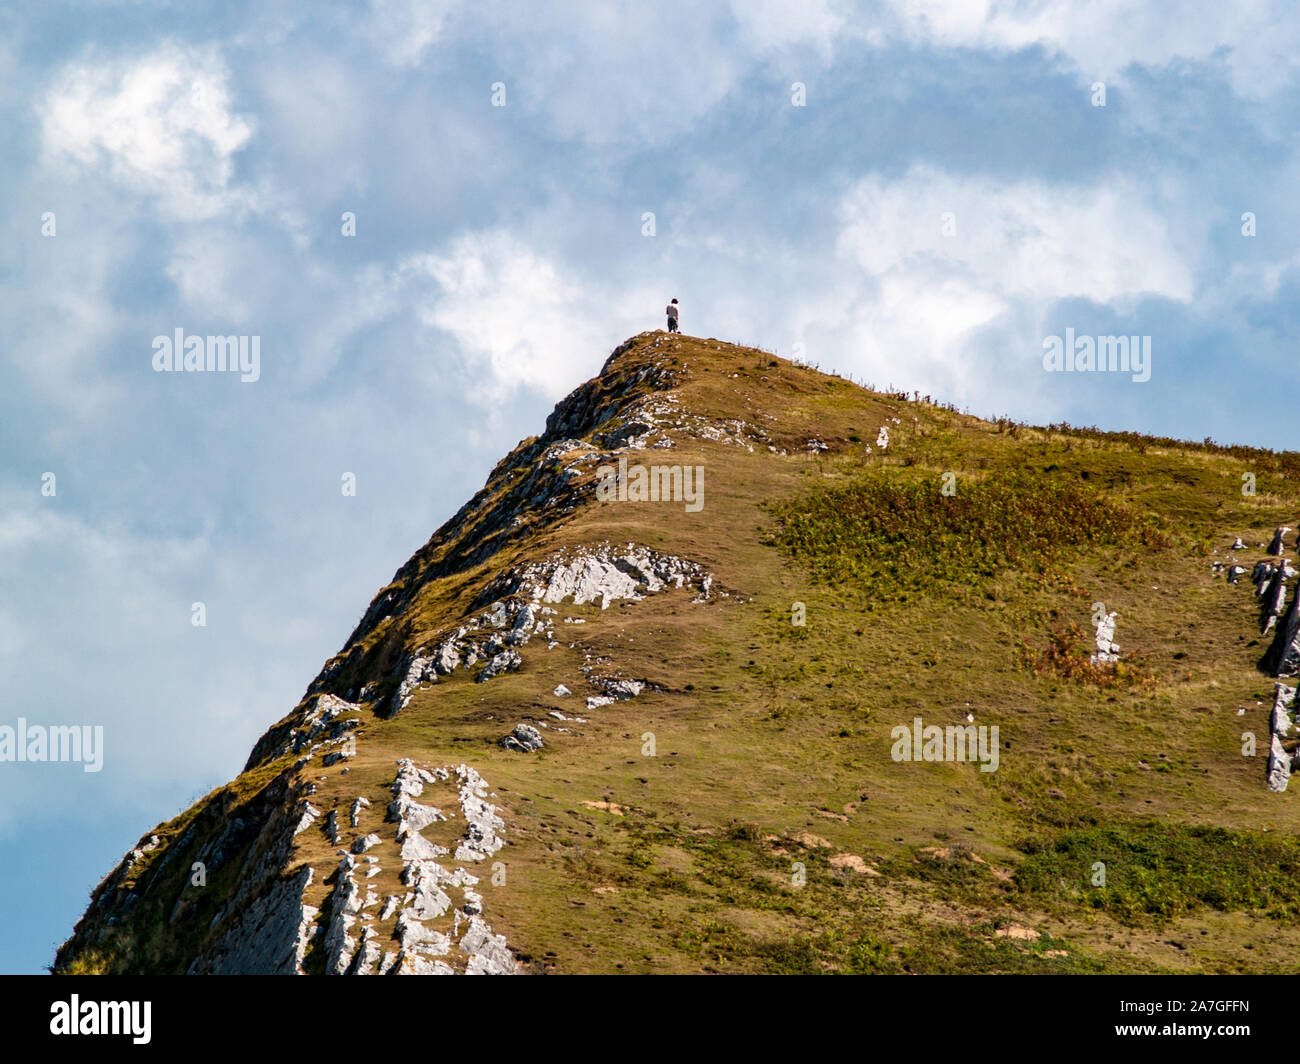 A hiker on the top of a hill near Llanmadoc, AONB. Llanmadoc, North Gower, Wales, UK. Stock Photo